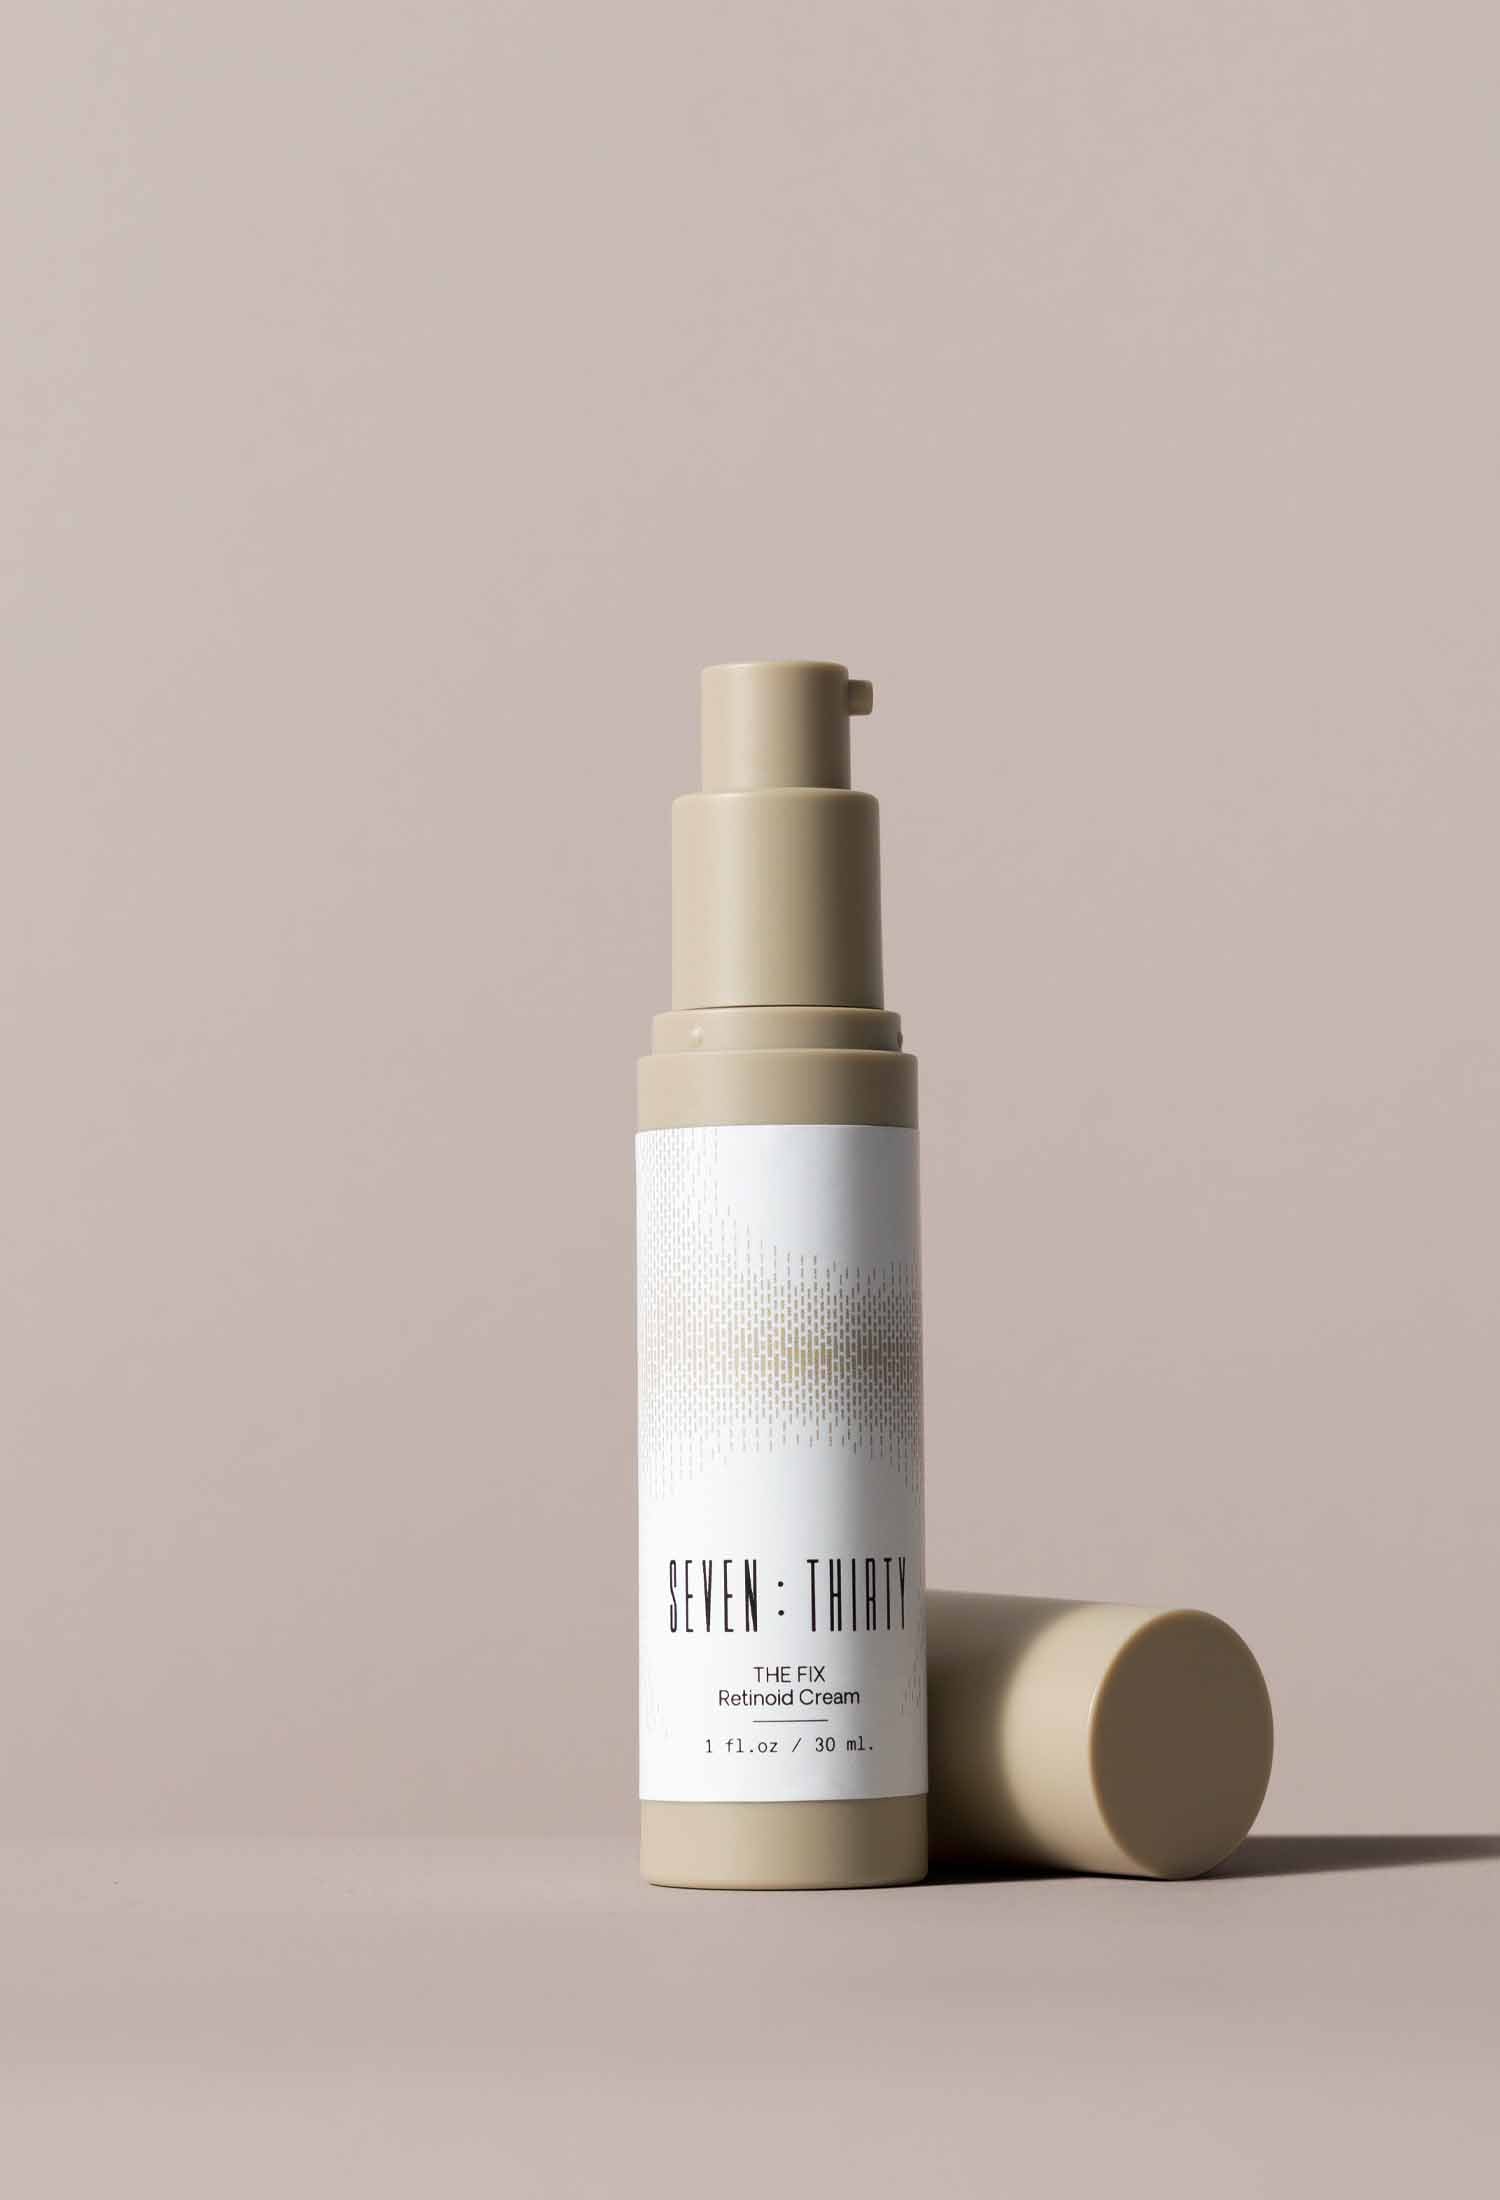 THE FIX Retinoid Cream, with its cap placed next to the bottle, on a khaki background 